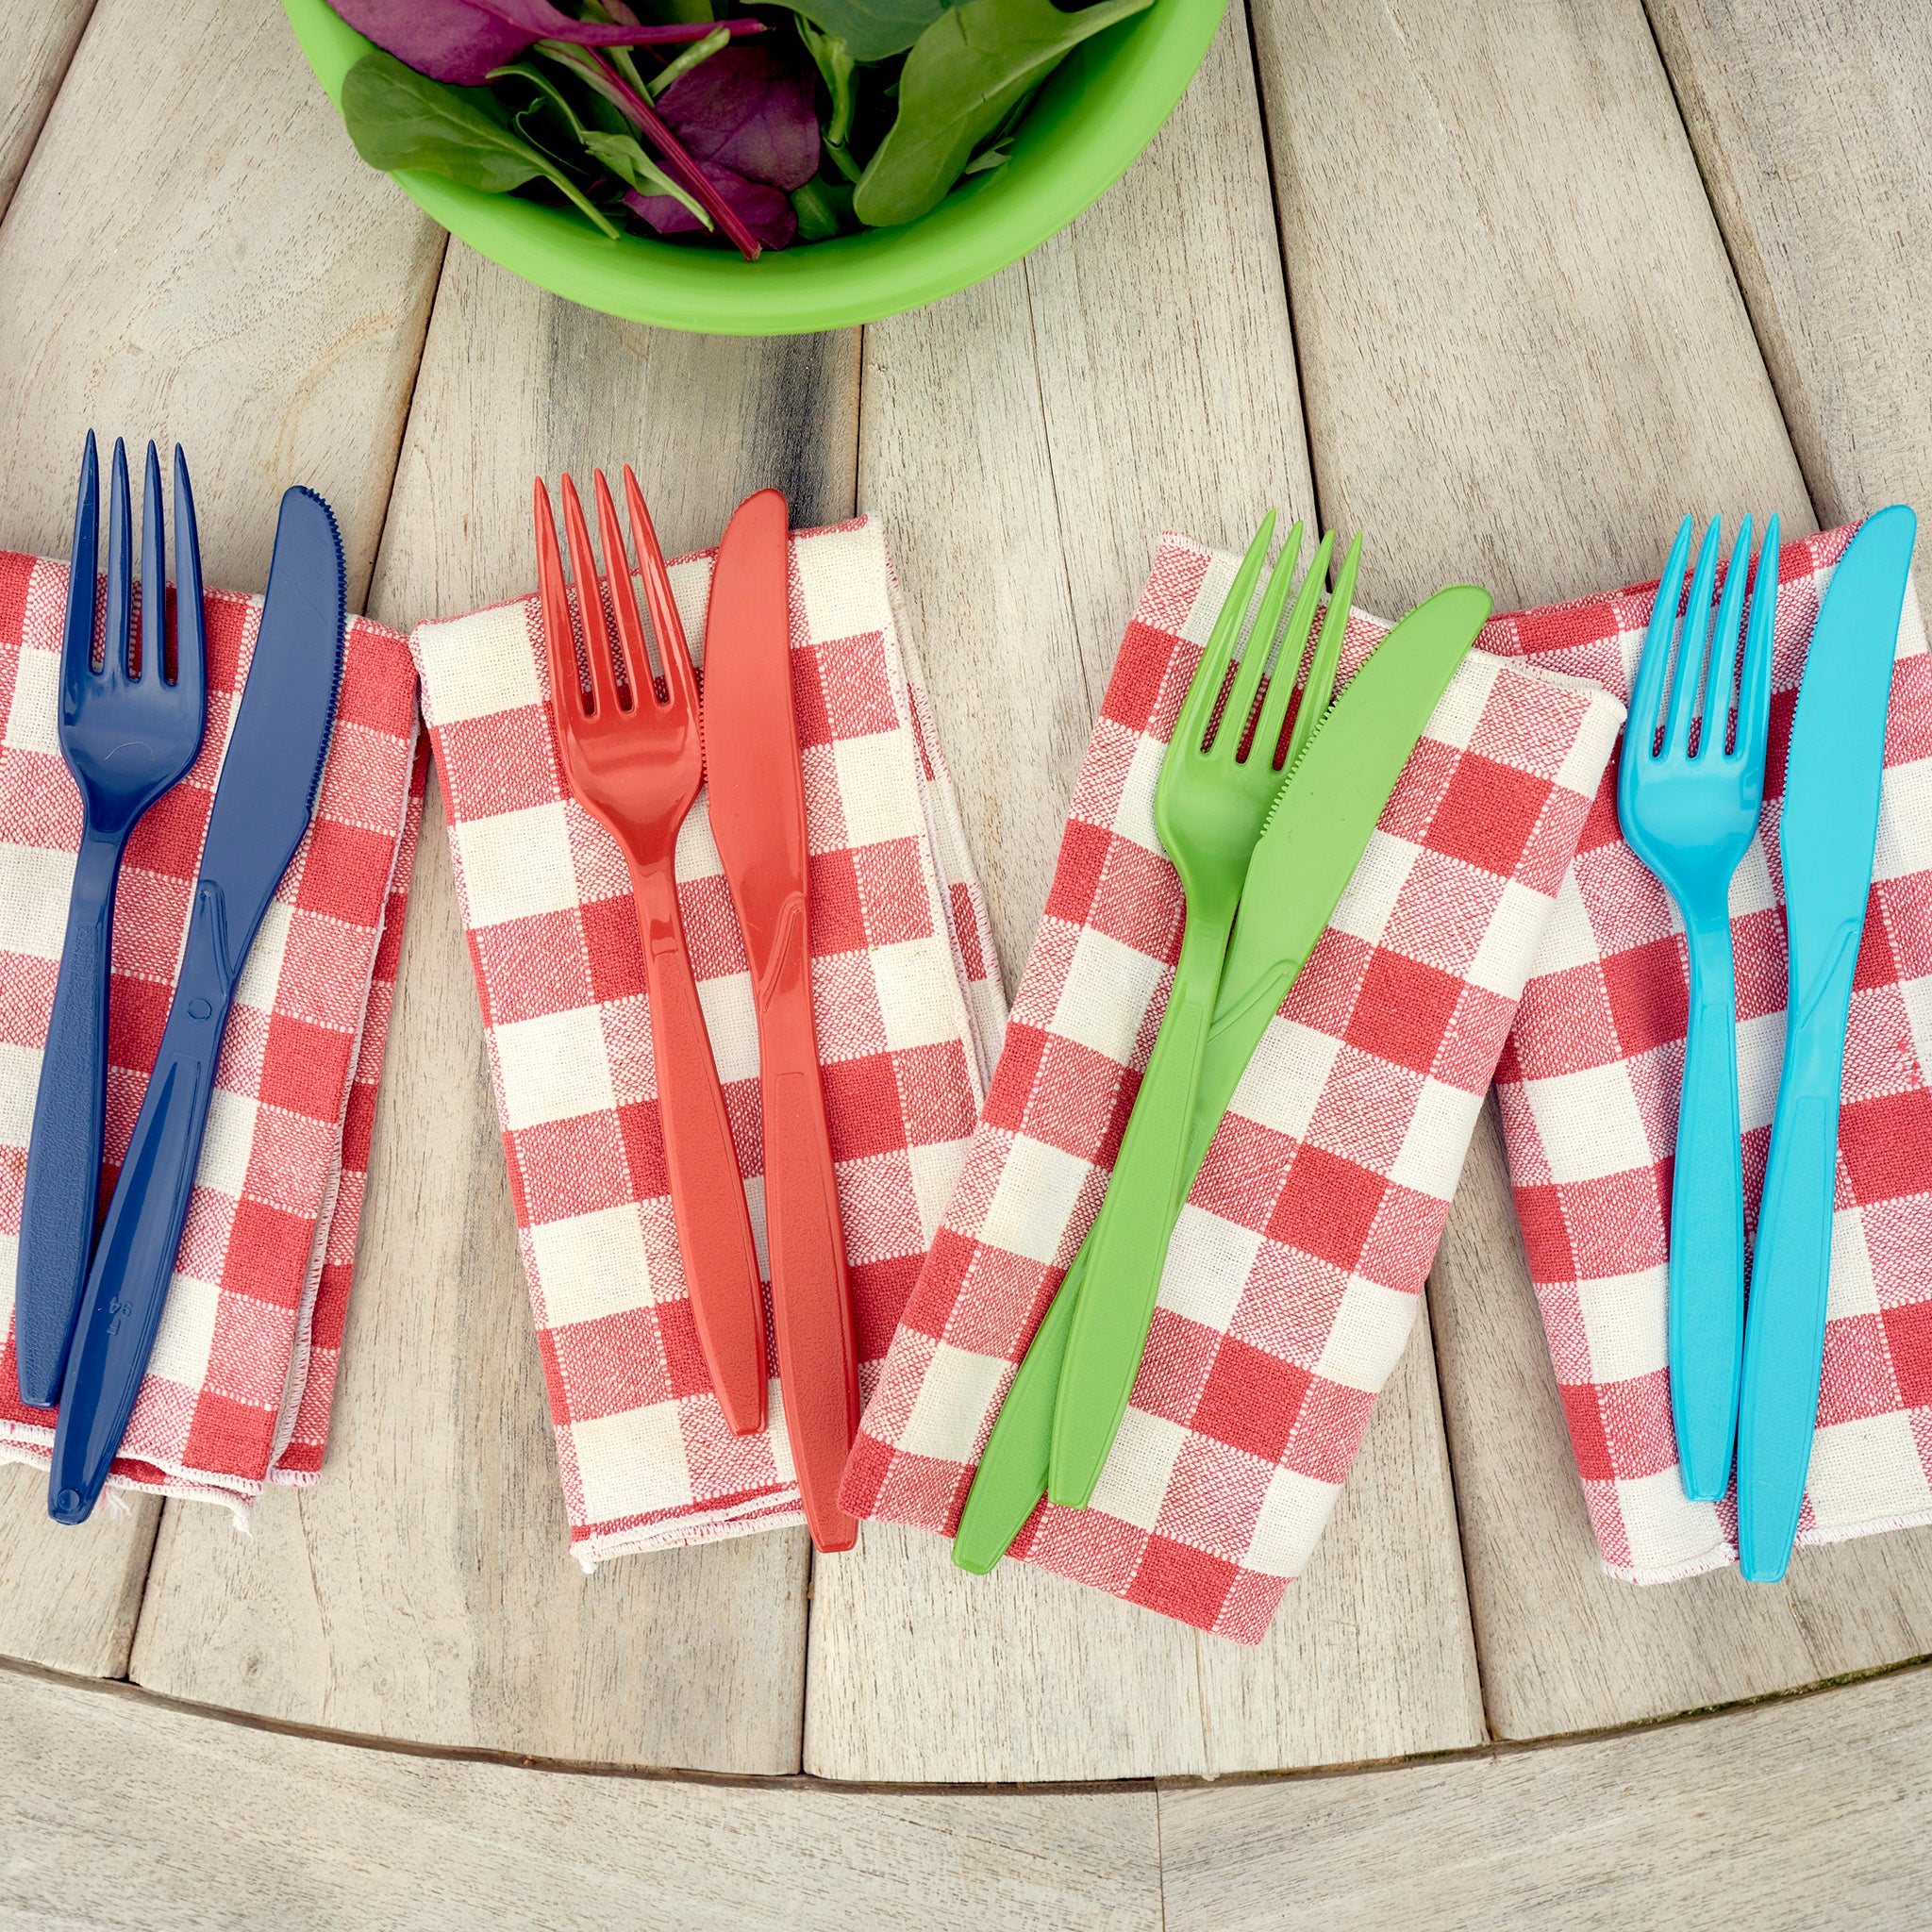 Recycled plastic cutlery set